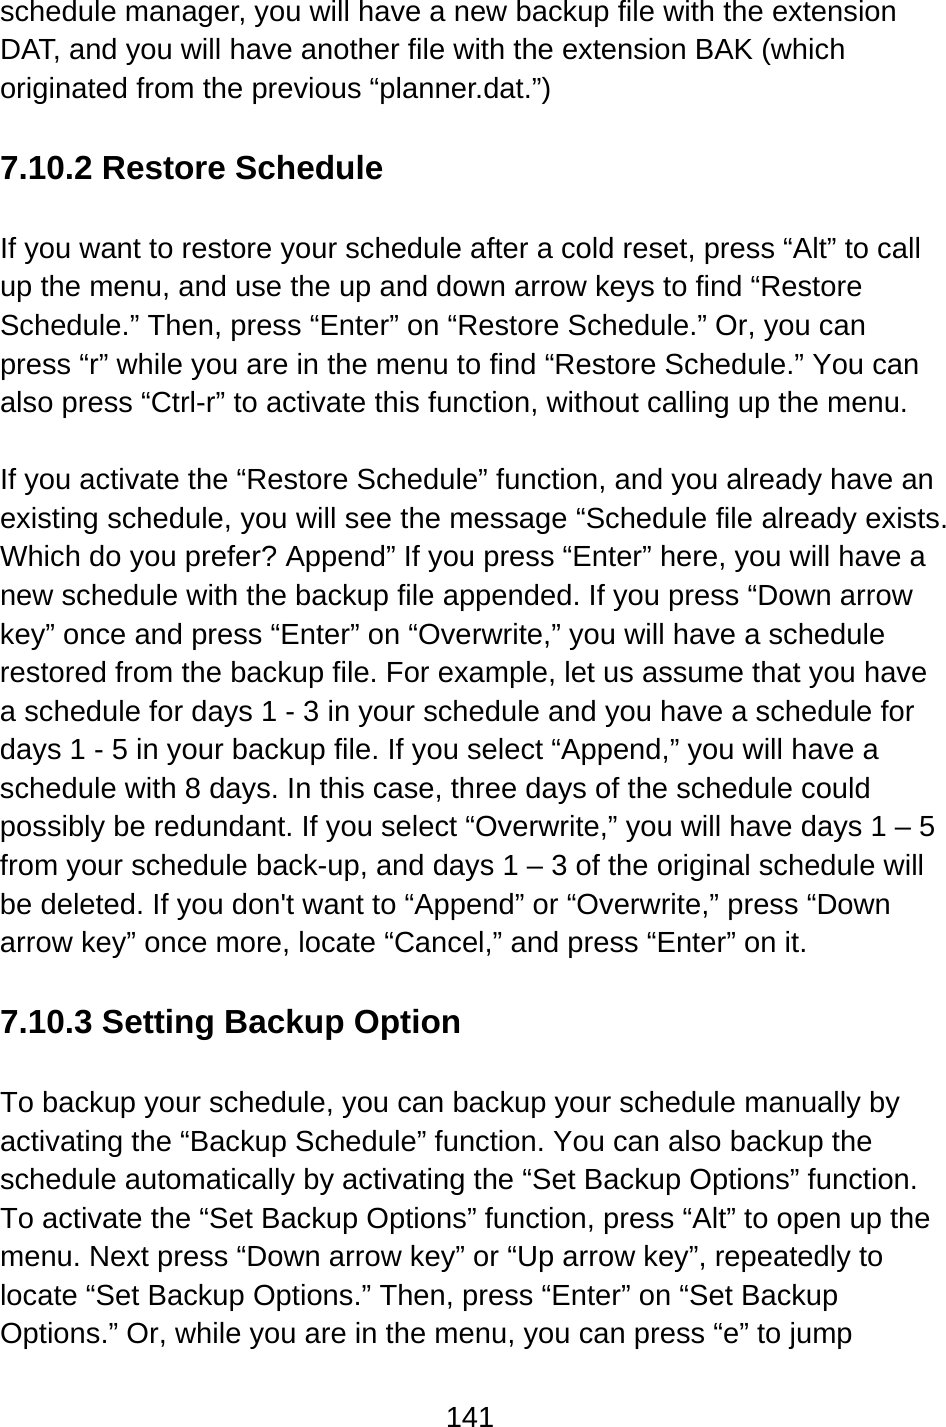 141  schedule manager, you will have a new backup file with the extension DAT, and you will have another file with the extension BAK (which originated from the previous “planner.dat.”)  7.10.2 Restore Schedule  If you want to restore your schedule after a cold reset, press “Alt” to call up the menu, and use the up and down arrow keys to find “Restore Schedule.” Then, press “Enter” on “Restore Schedule.” Or, you can press “r” while you are in the menu to find “Restore Schedule.” You can also press “Ctrl-r” to activate this function, without calling up the menu.  If you activate the “Restore Schedule” function, and you already have an existing schedule, you will see the message “Schedule file already exists. Which do you prefer? Append” If you press “Enter” here, you will have a new schedule with the backup file appended. If you press “Down arrow key” once and press “Enter” on “Overwrite,” you will have a schedule restored from the backup file. For example, let us assume that you have a schedule for days 1 - 3 in your schedule and you have a schedule for days 1 - 5 in your backup file. If you select “Append,” you will have a schedule with 8 days. In this case, three days of the schedule could possibly be redundant. If you select “Overwrite,” you will have days 1 – 5 from your schedule back-up, and days 1 – 3 of the original schedule will be deleted. If you don&apos;t want to “Append” or “Overwrite,” press “Down arrow key” once more, locate “Cancel,” and press “Enter” on it.  7.10.3 Setting Backup Option  To backup your schedule, you can backup your schedule manually by activating the “Backup Schedule” function. You can also backup the schedule automatically by activating the “Set Backup Options” function.   To activate the “Set Backup Options” function, press “Alt” to open up the menu. Next press “Down arrow key” or “Up arrow key”, repeatedly to locate “Set Backup Options.” Then, press “Enter” on “Set Backup Options.” Or, while you are in the menu, you can press “e” to jump 